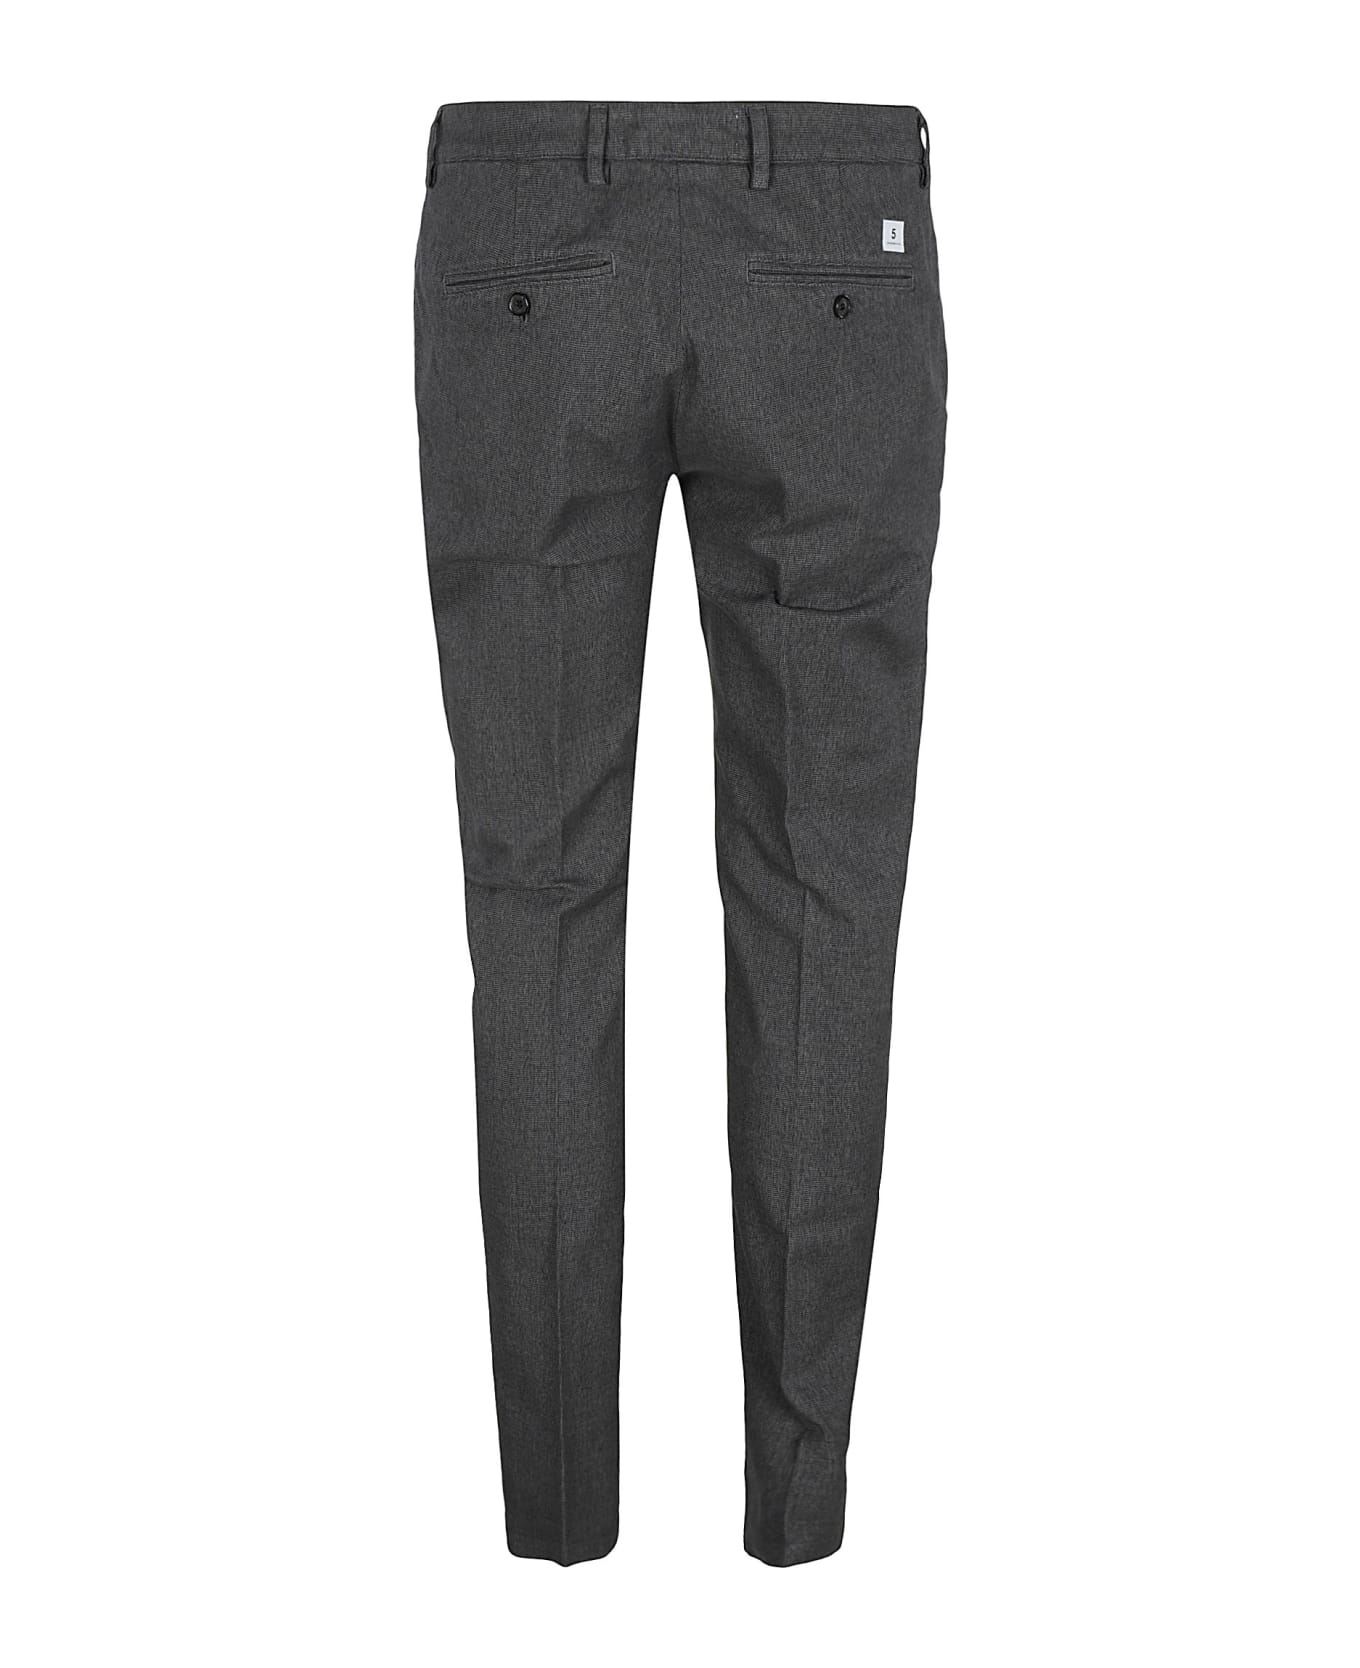 Department Five Mike Pant - Zinco ボトムス